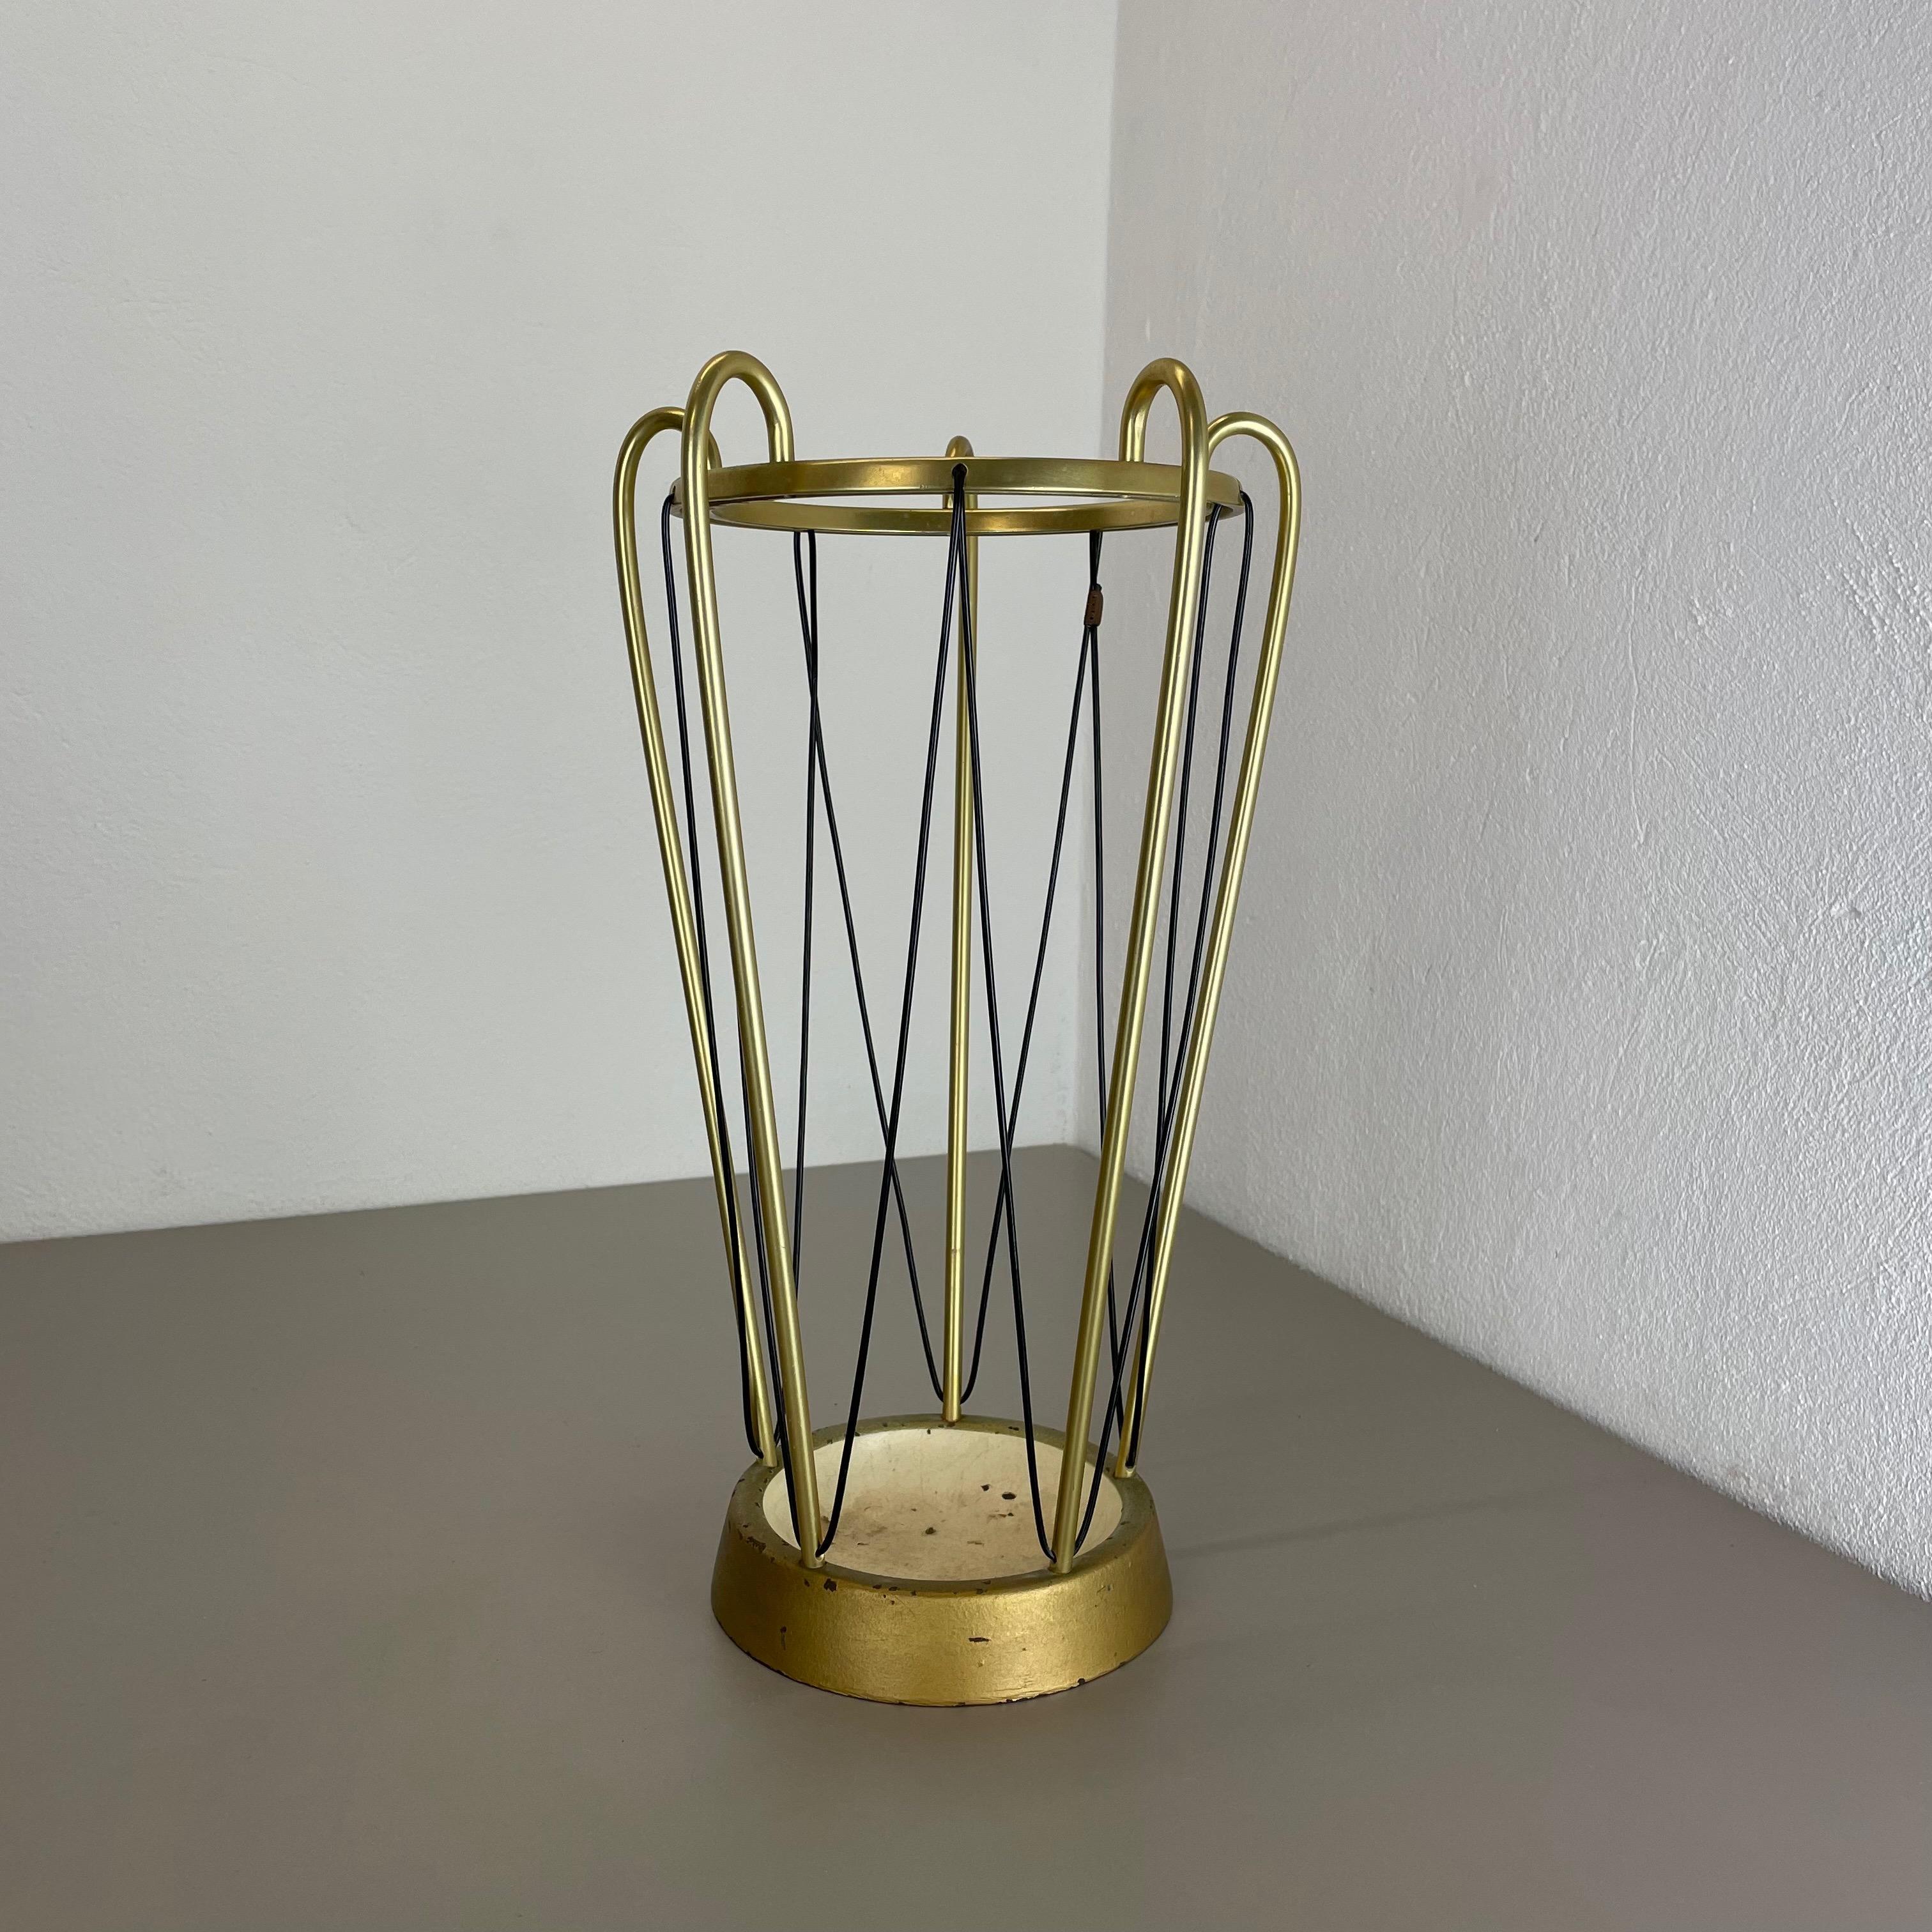 Article:

Bauhaus umbrella stand


Origin:

Germany


Age:

1950s


This original vintage Bauhaus style umbrella stand was produced in the 1950s in Germany. The brass colored top elements is made of aluminum the heavy metal base